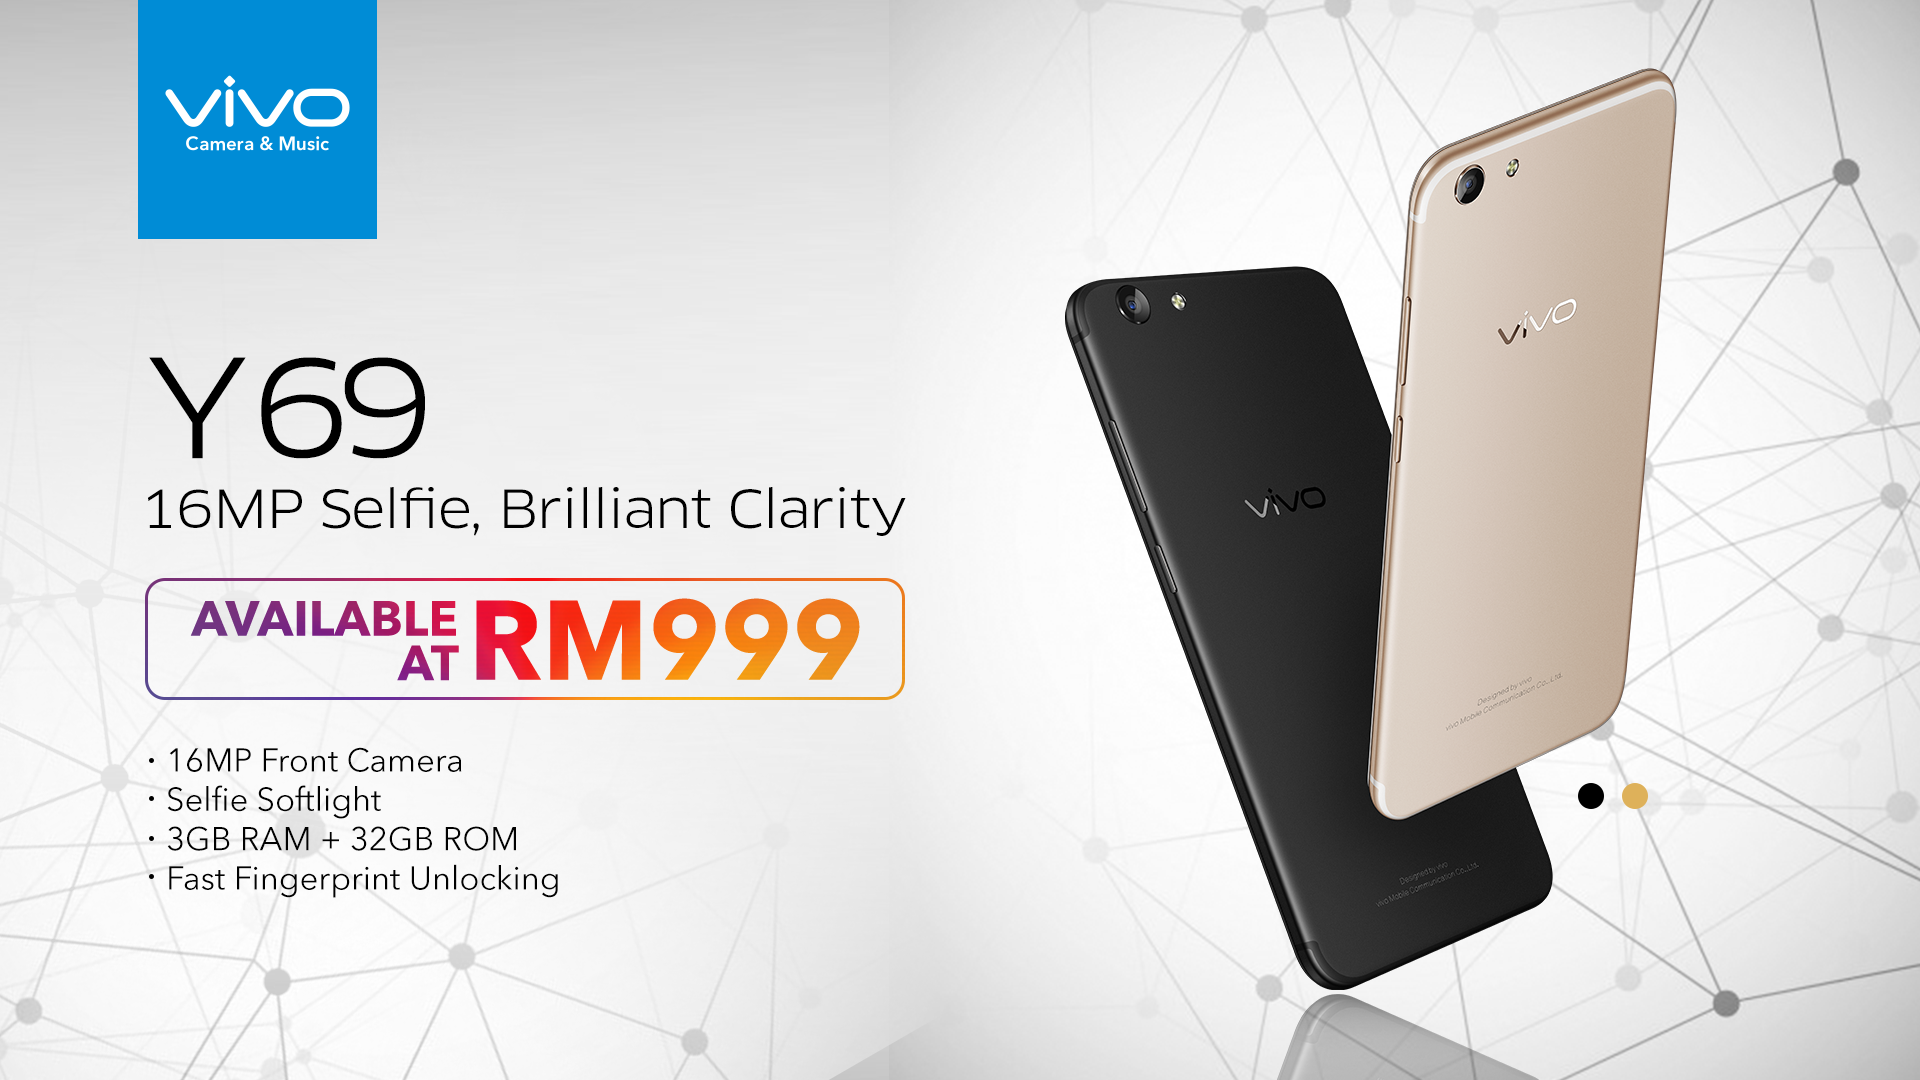 Budget friendly 16MP selfie smartphone vivo Y69 coming soon for RM999